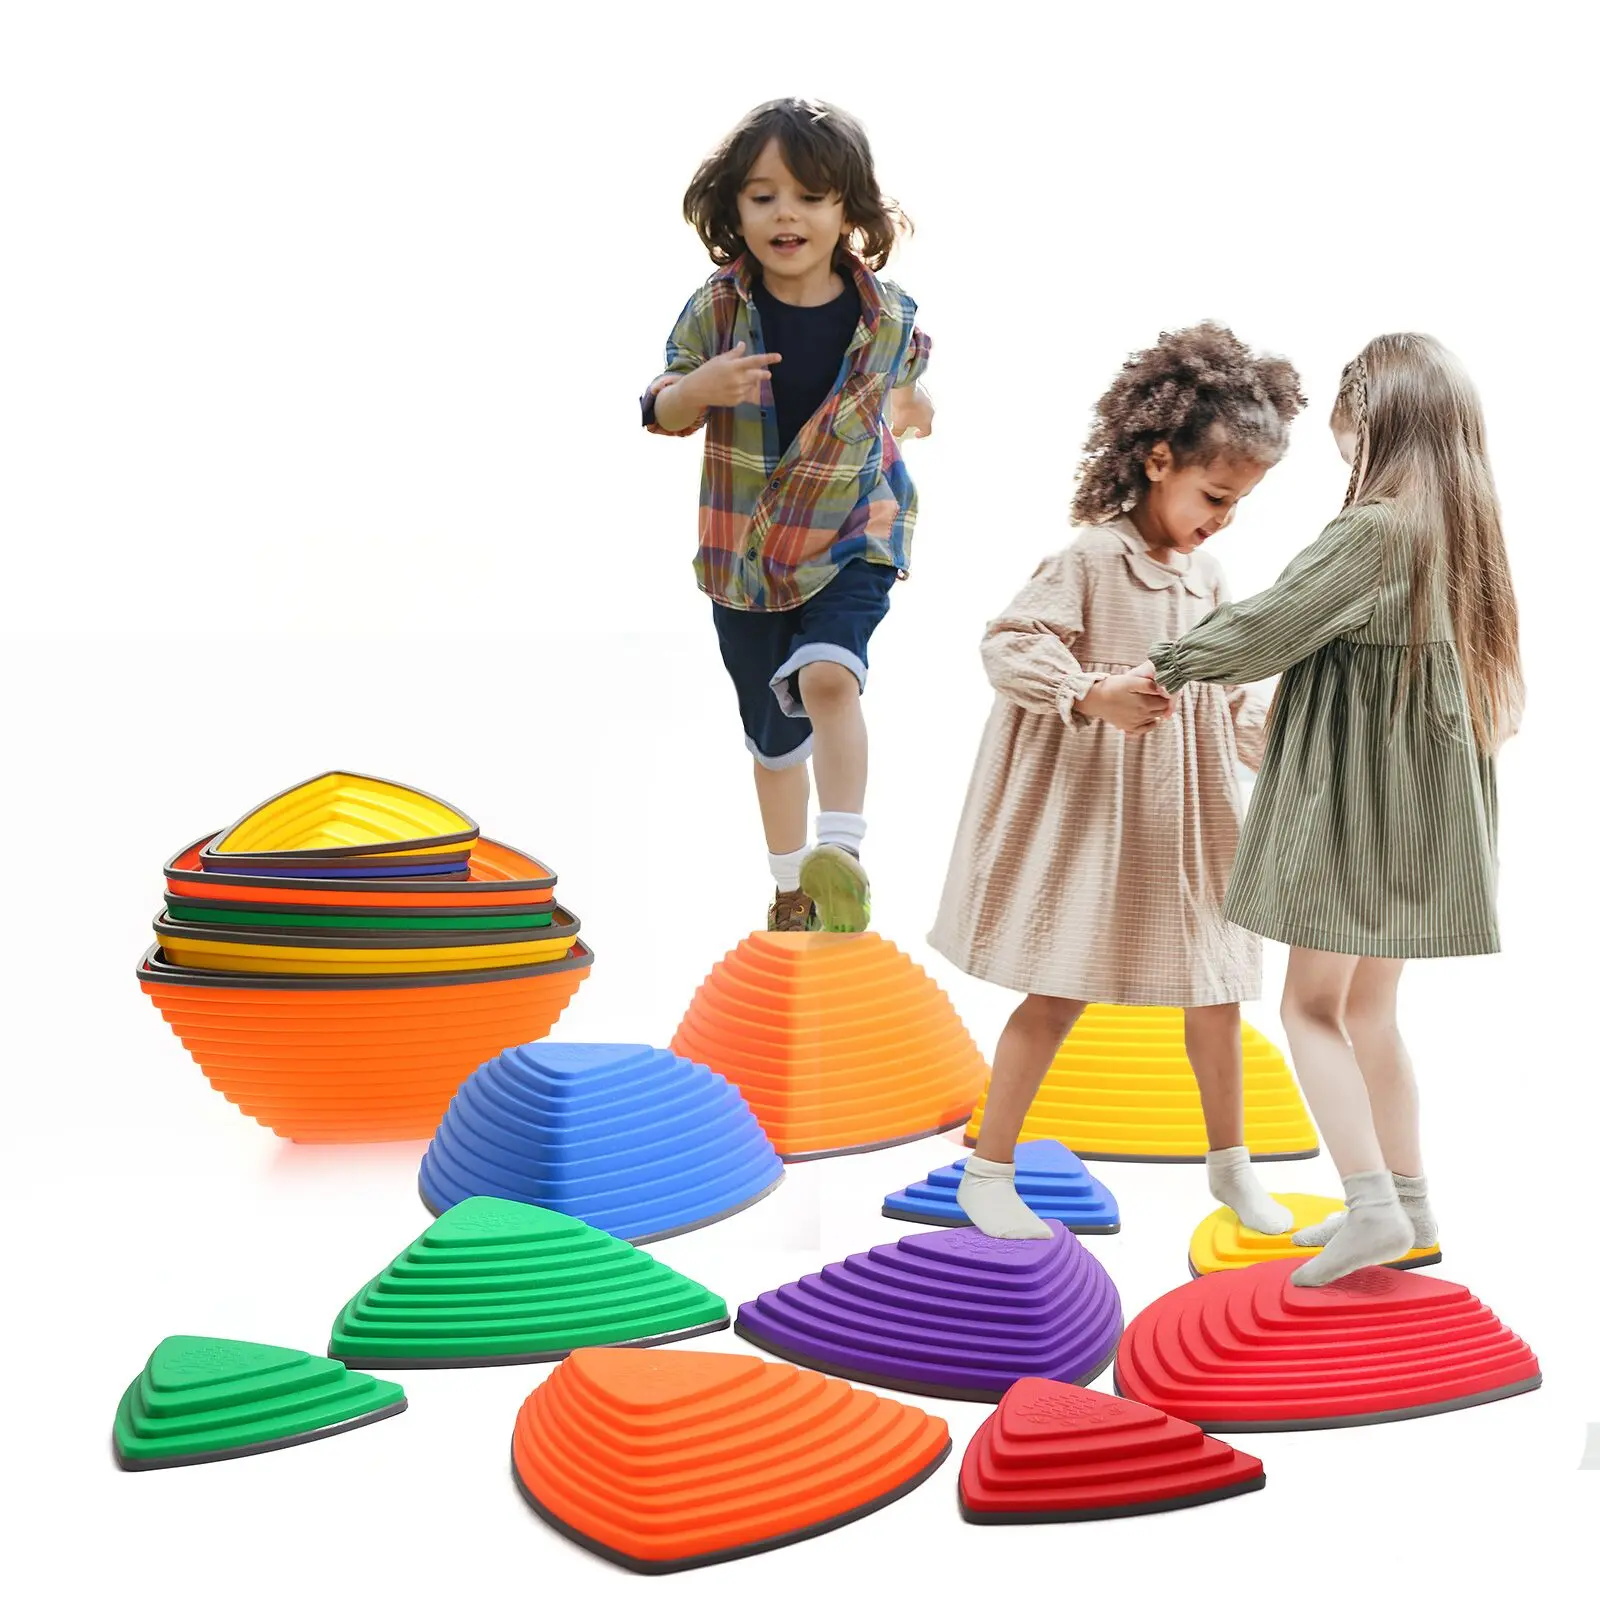 Fun and Safe Makarci Balance Stepping Stones for Kids